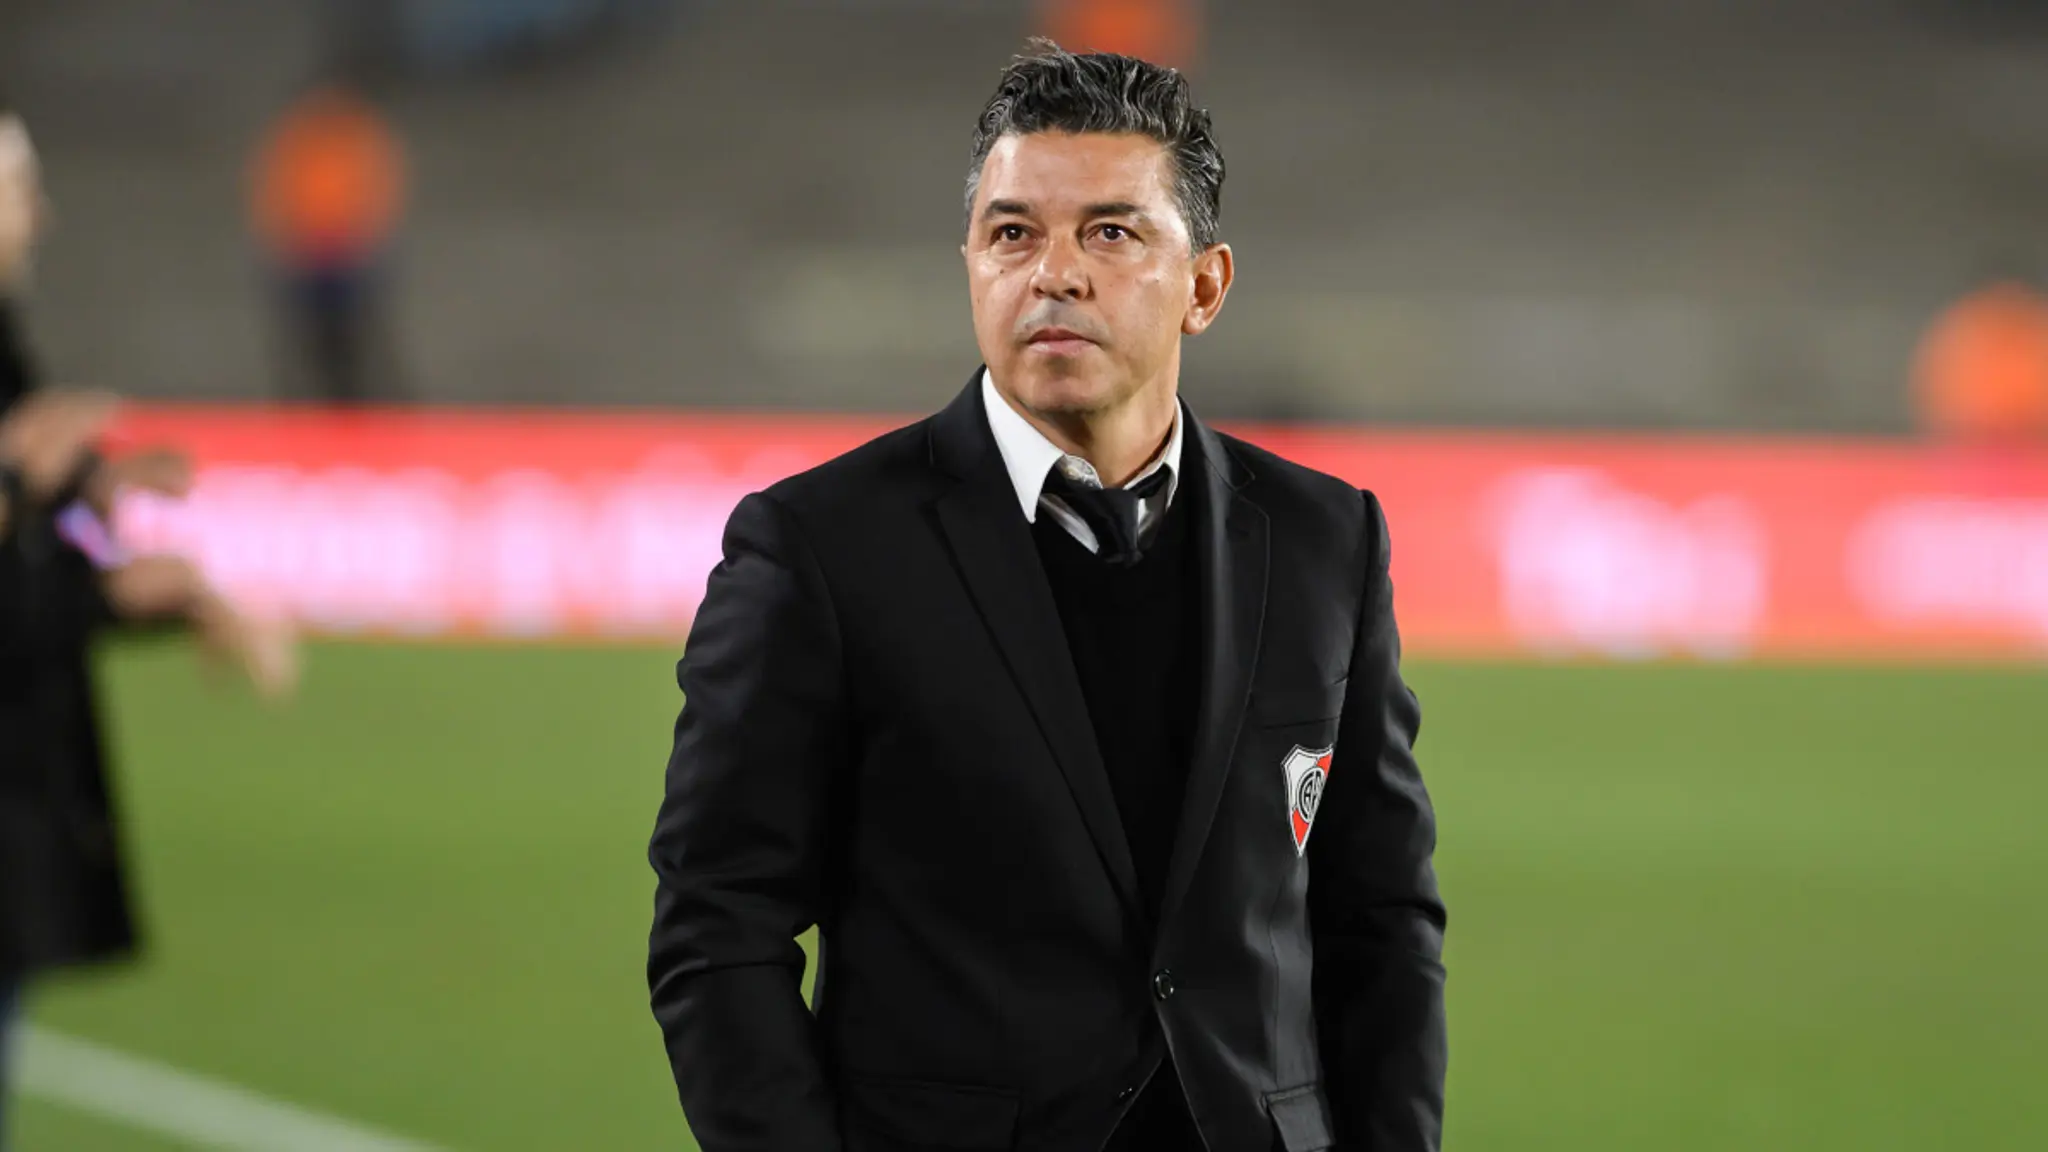 Marcelo Gallardo was reportedly one of the early options for Milan to replace Stefano Pioli. The biggest obstacle to hiring him is about to be removed.